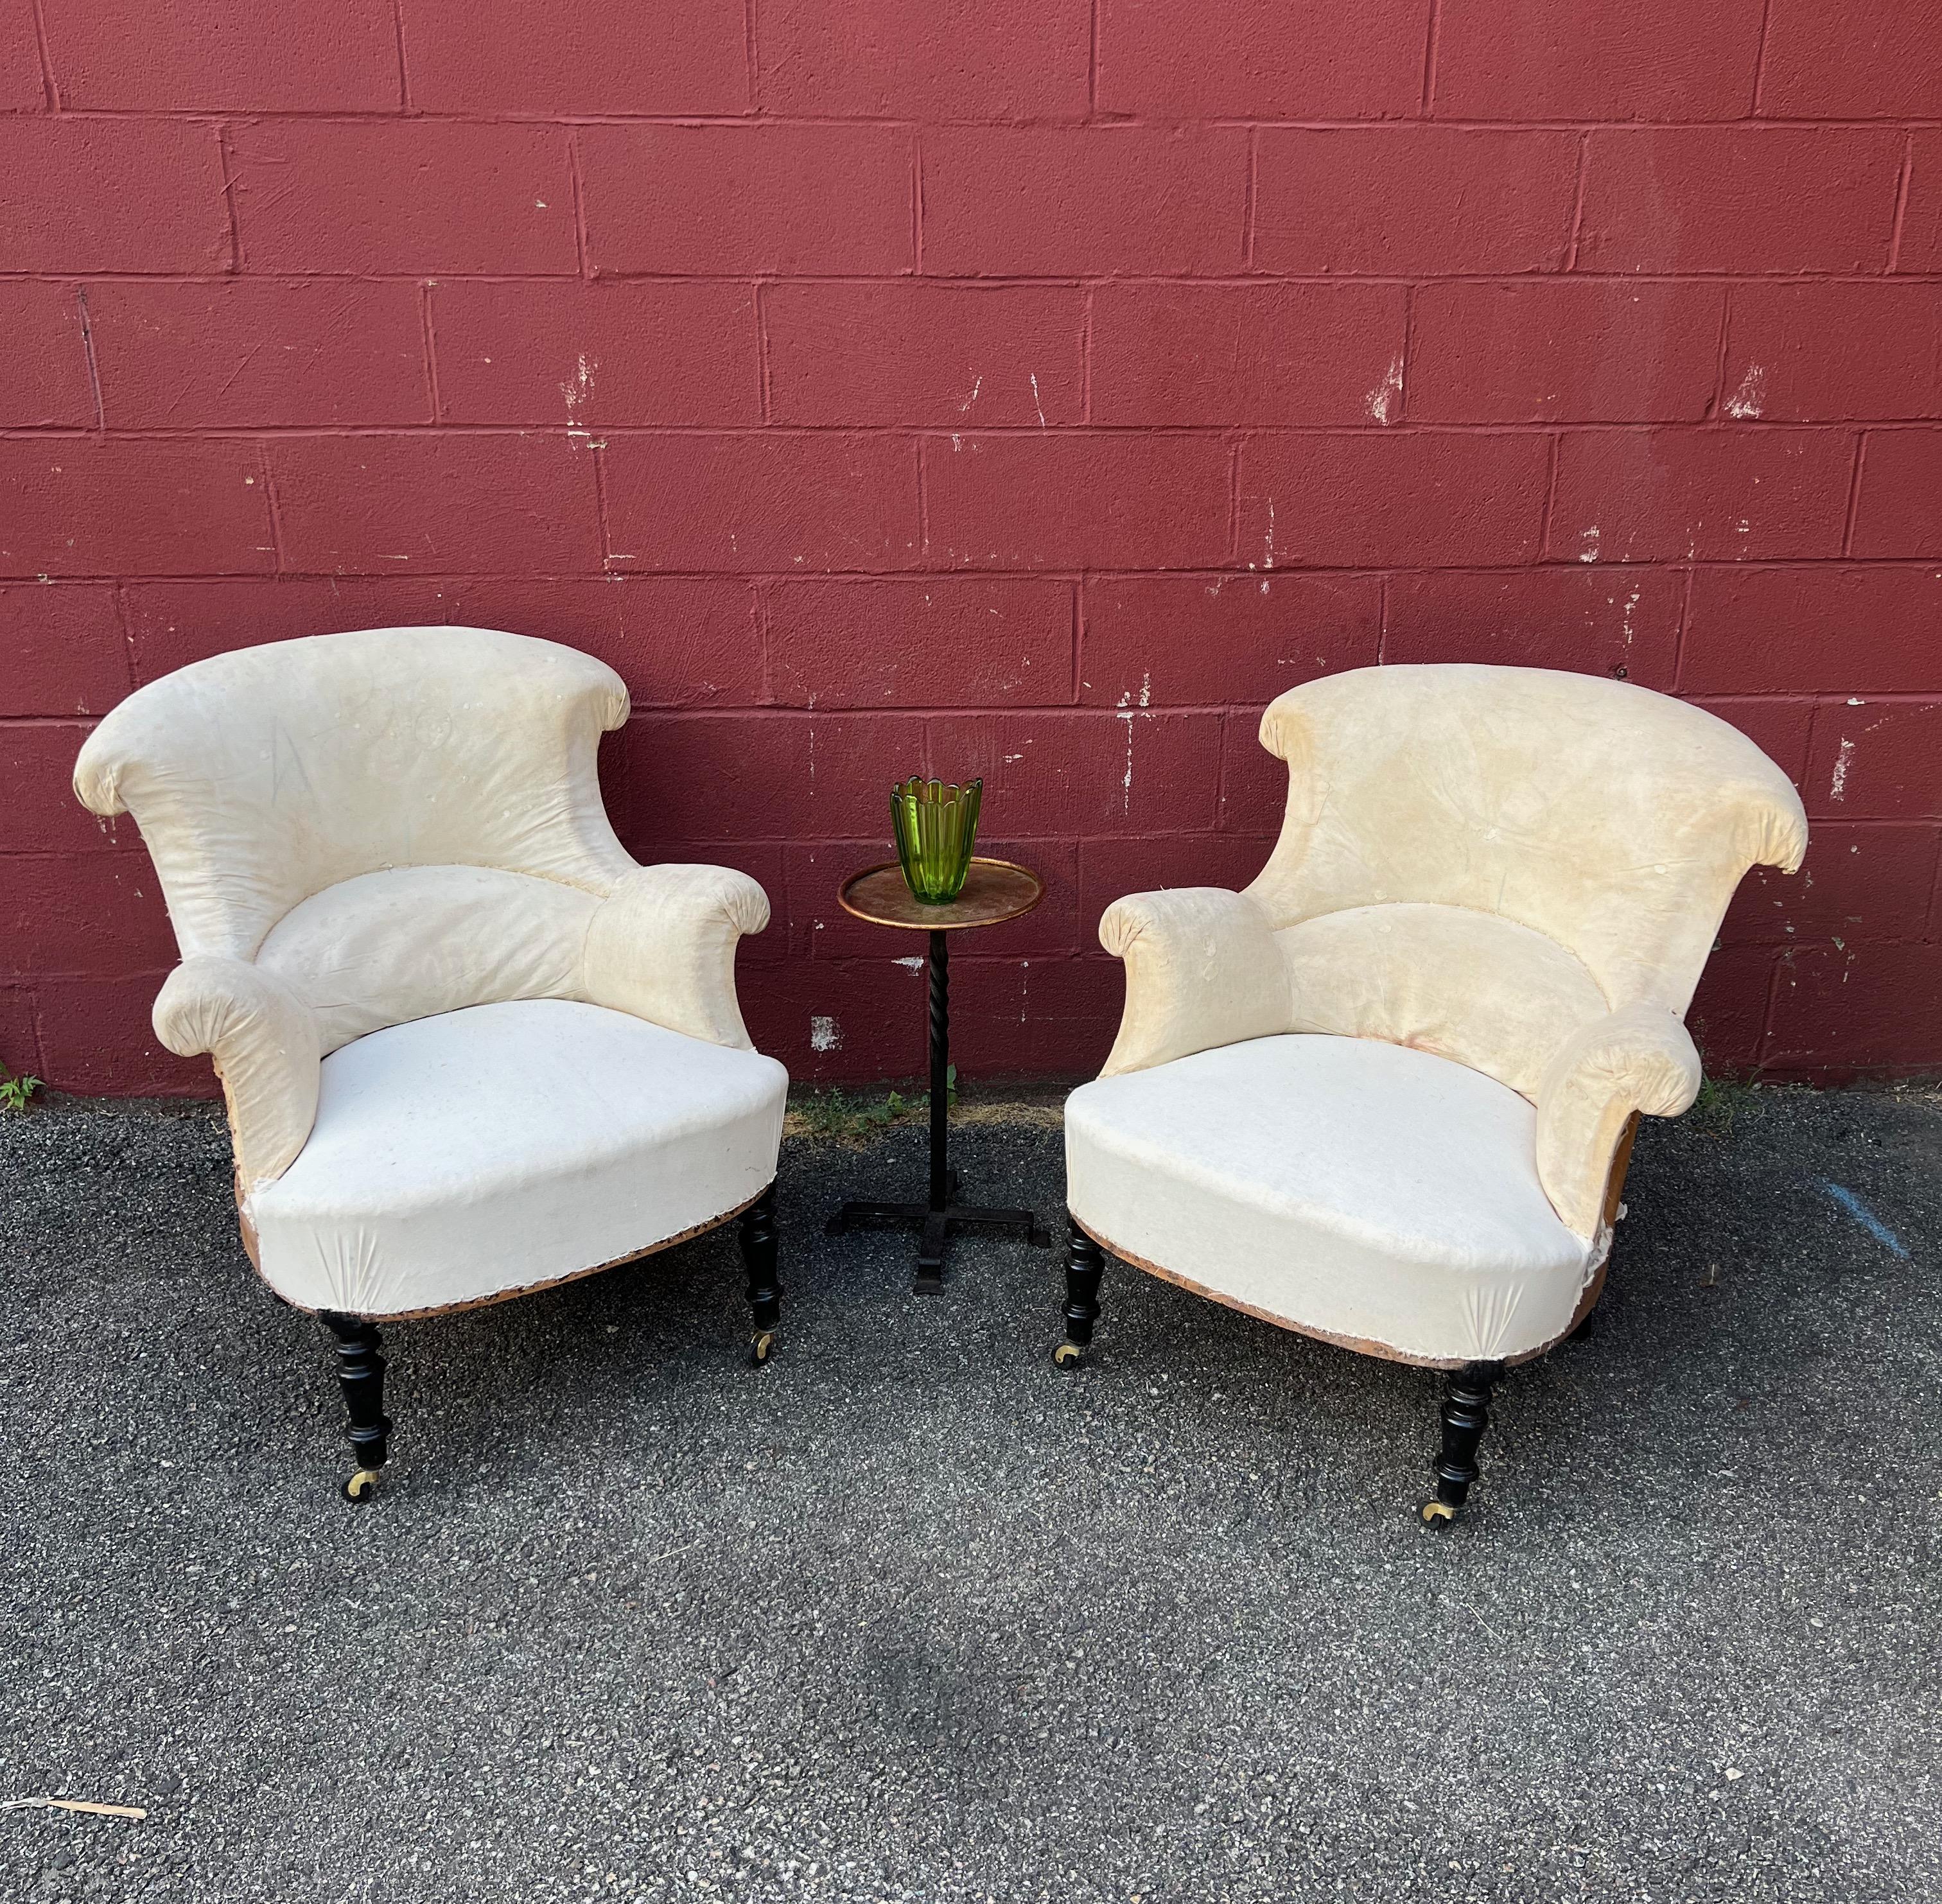 An exquisite pair of French 19th century Napoleon III style armchairs that embody the timeless elegance of this iconic era. These chairs are designed with impeccable proportions, featuring a generously curved back that offers outstanding lumbar